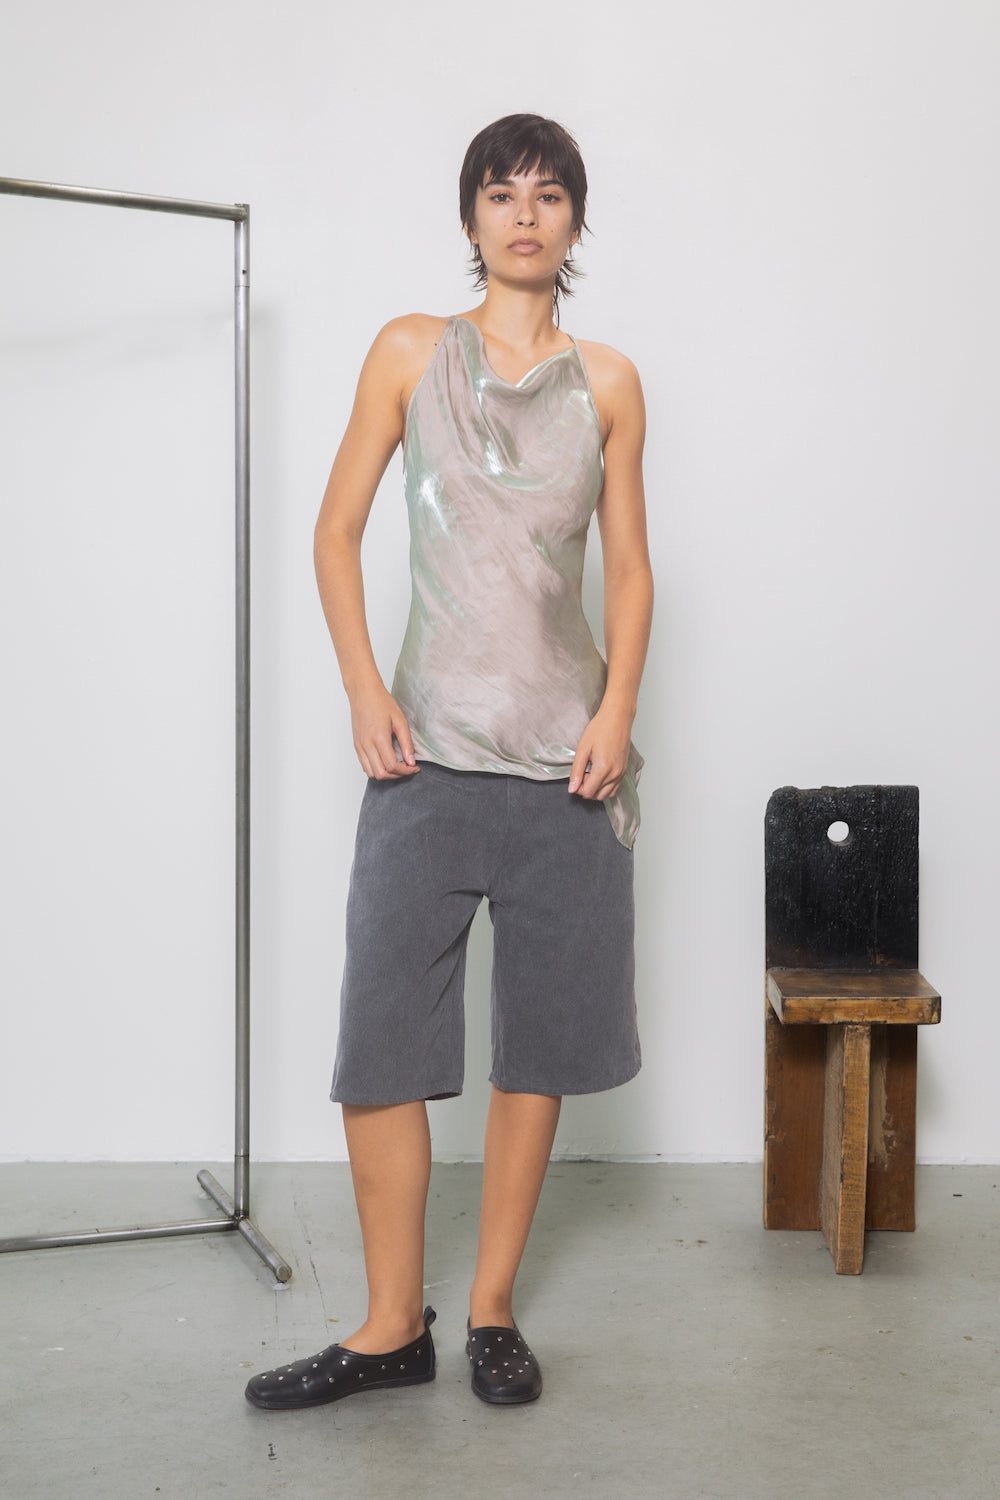 Clothing - Tops - Tanks & Camis - Seagreen